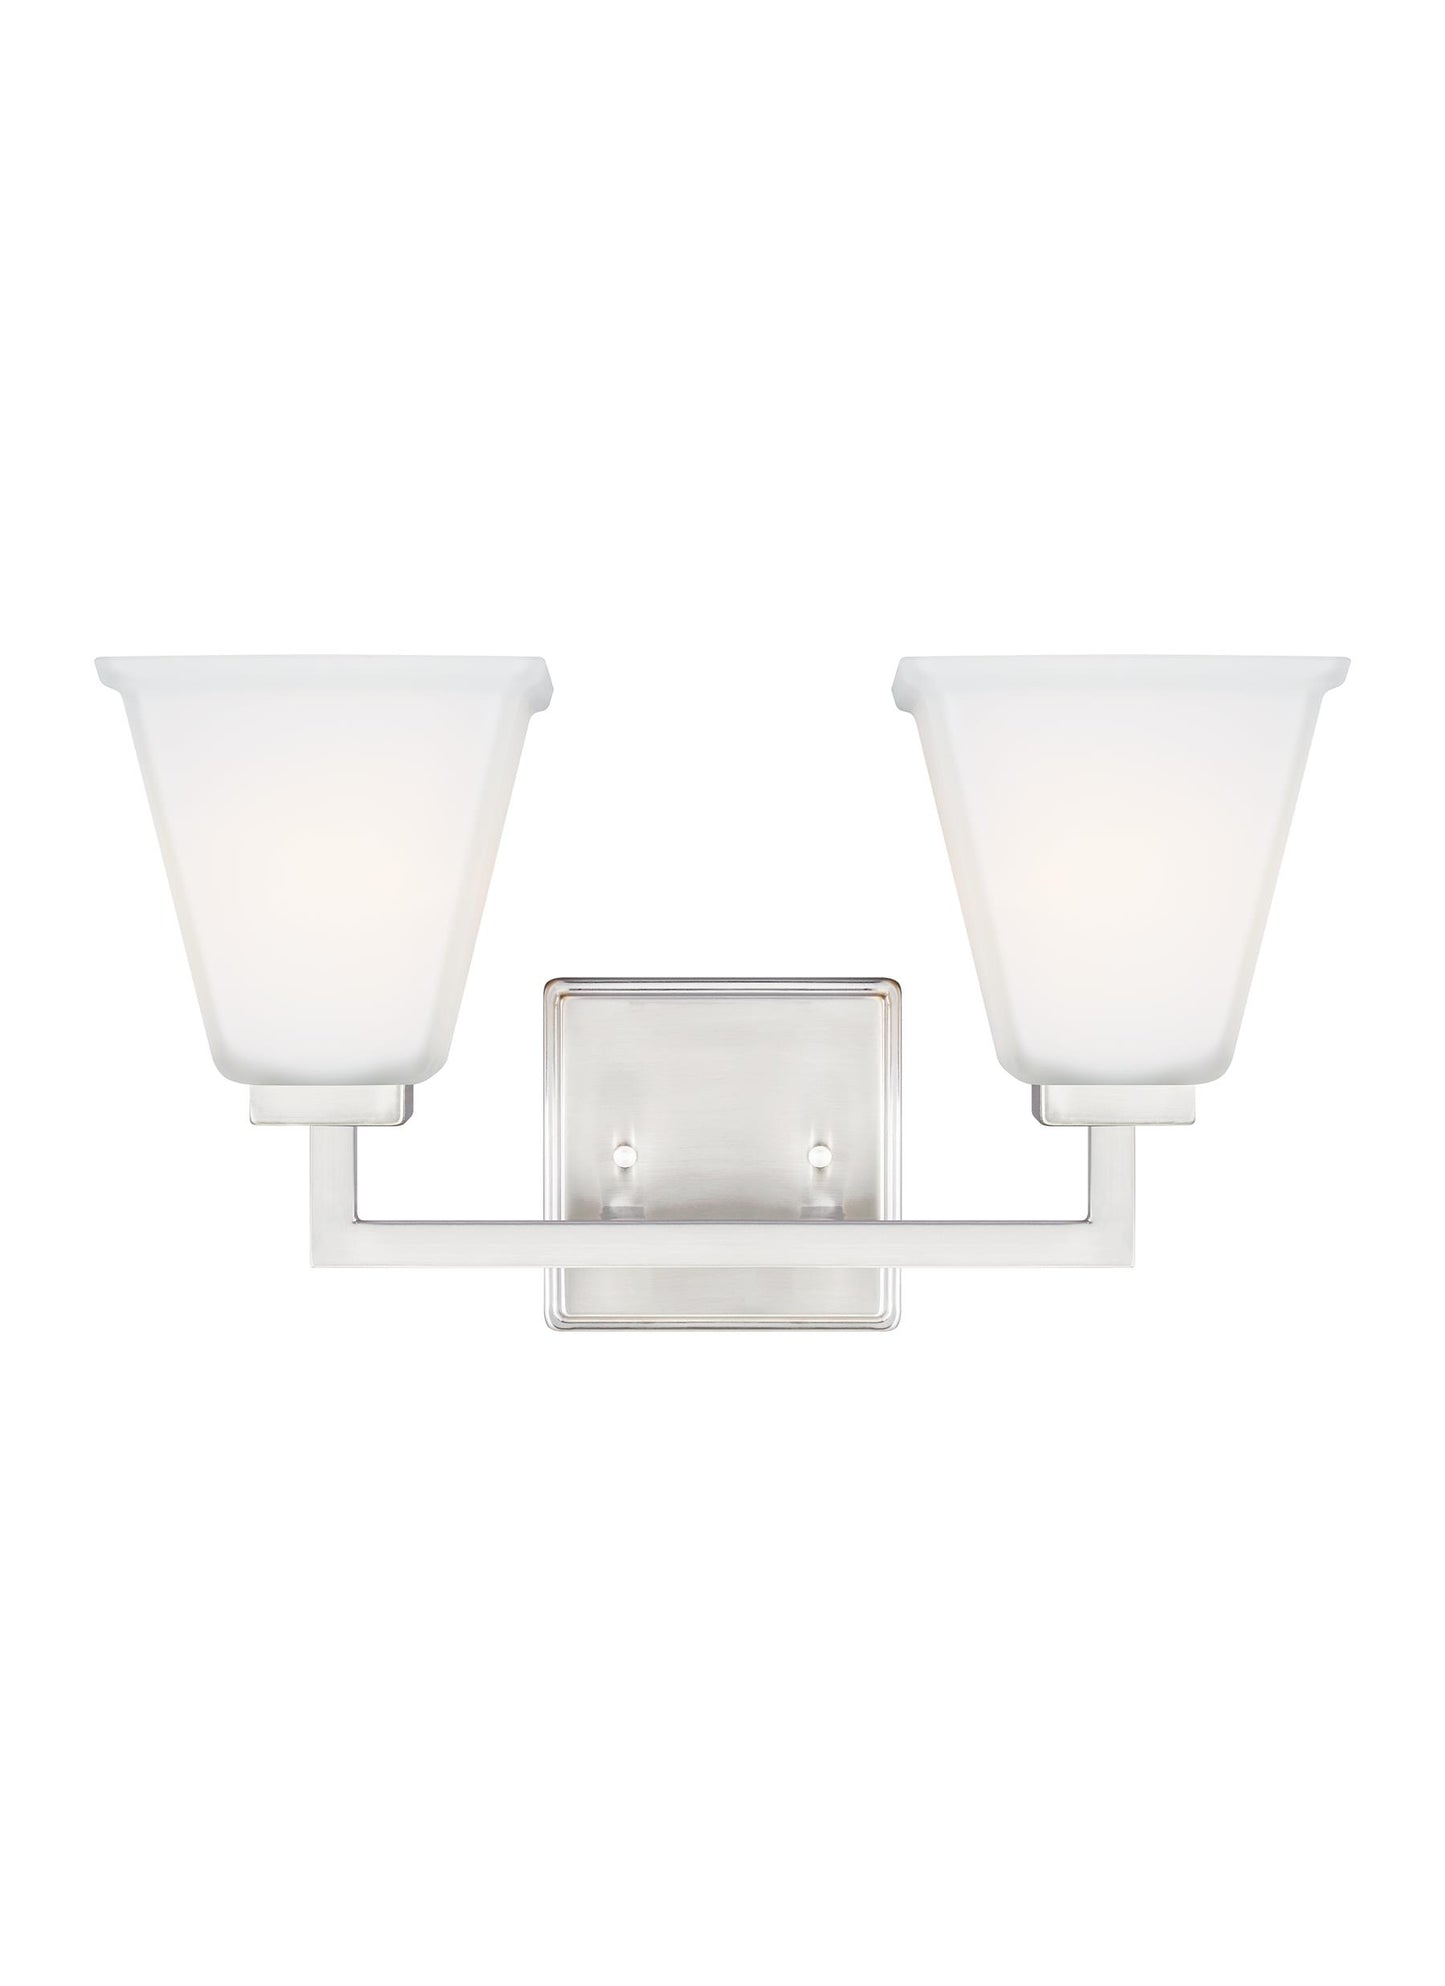 Ellis Harper classic 2-light indoor dimmable bath vanity wall sconce in brushed nickel silver finish with etched white ins...